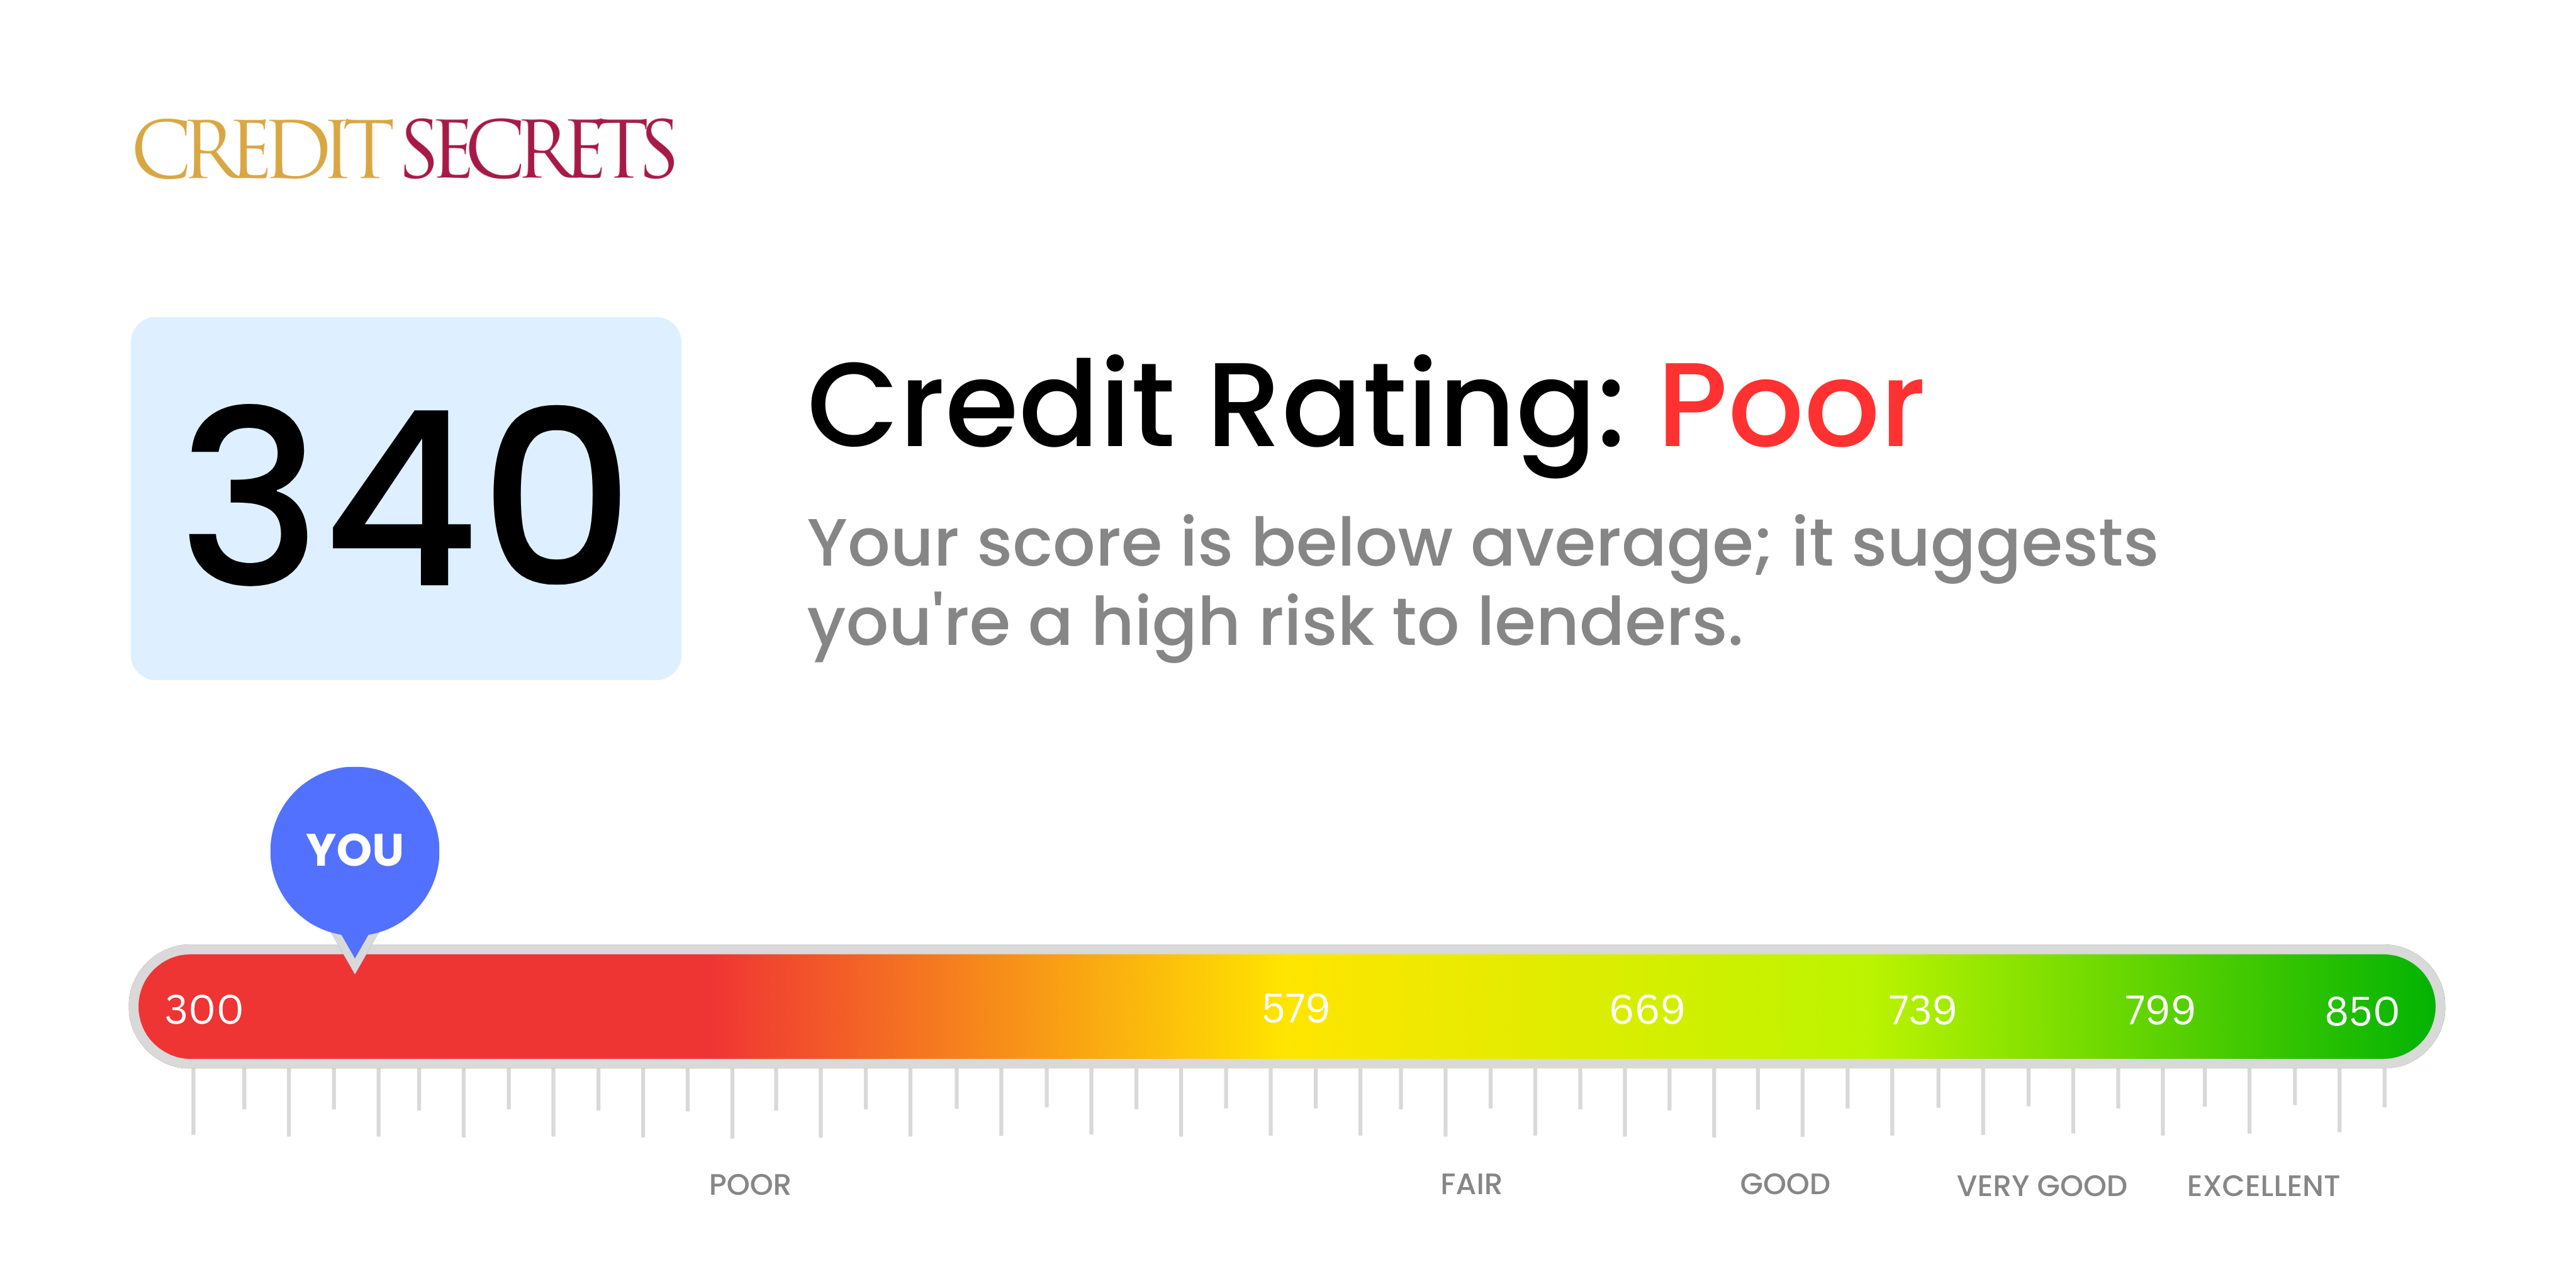 Is 340 a good credit score?